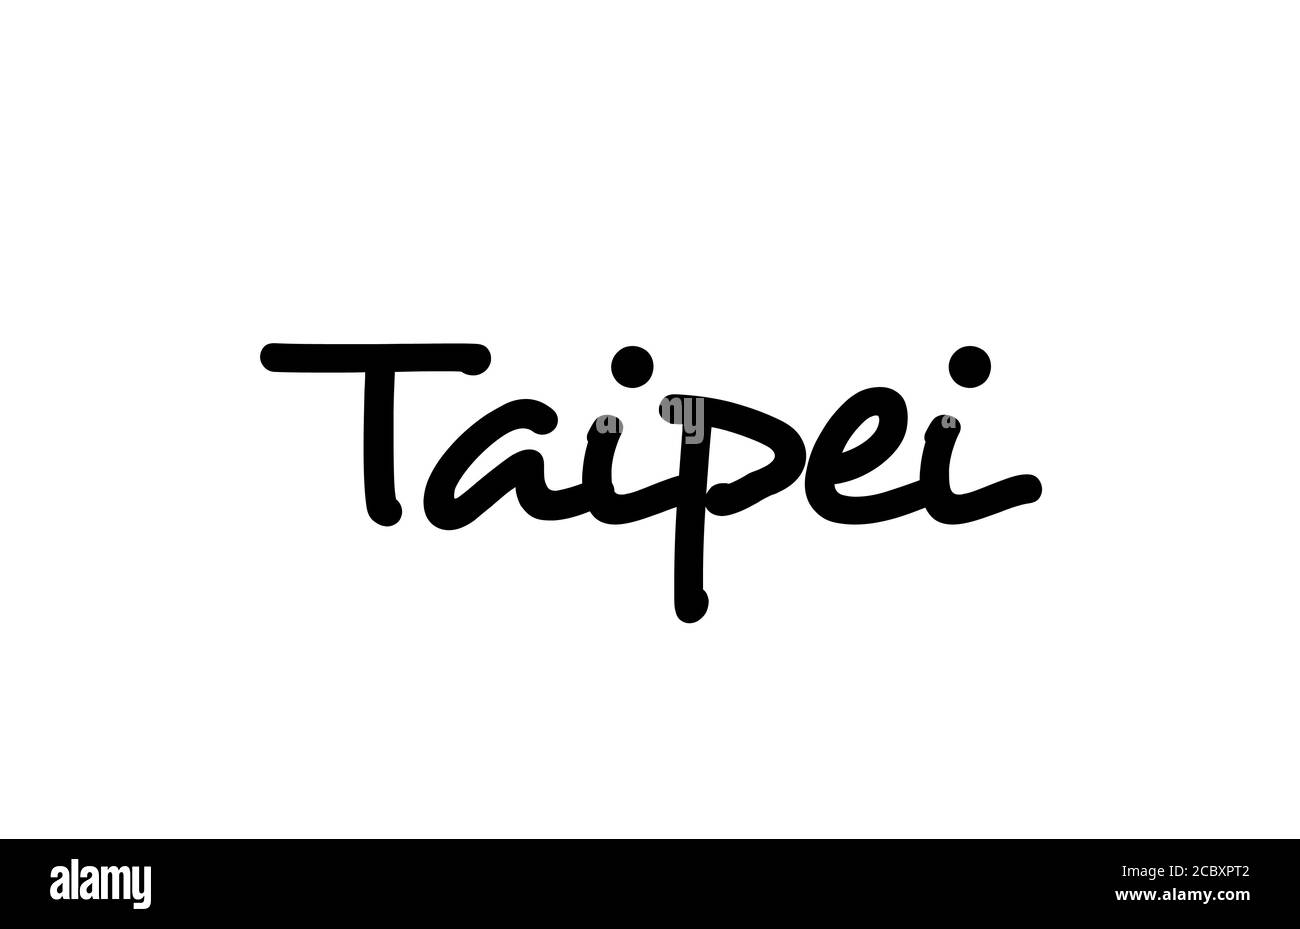 Taipei city handwritten text word hand lettering. Calligraphy text. Typography in black color Stock Vector